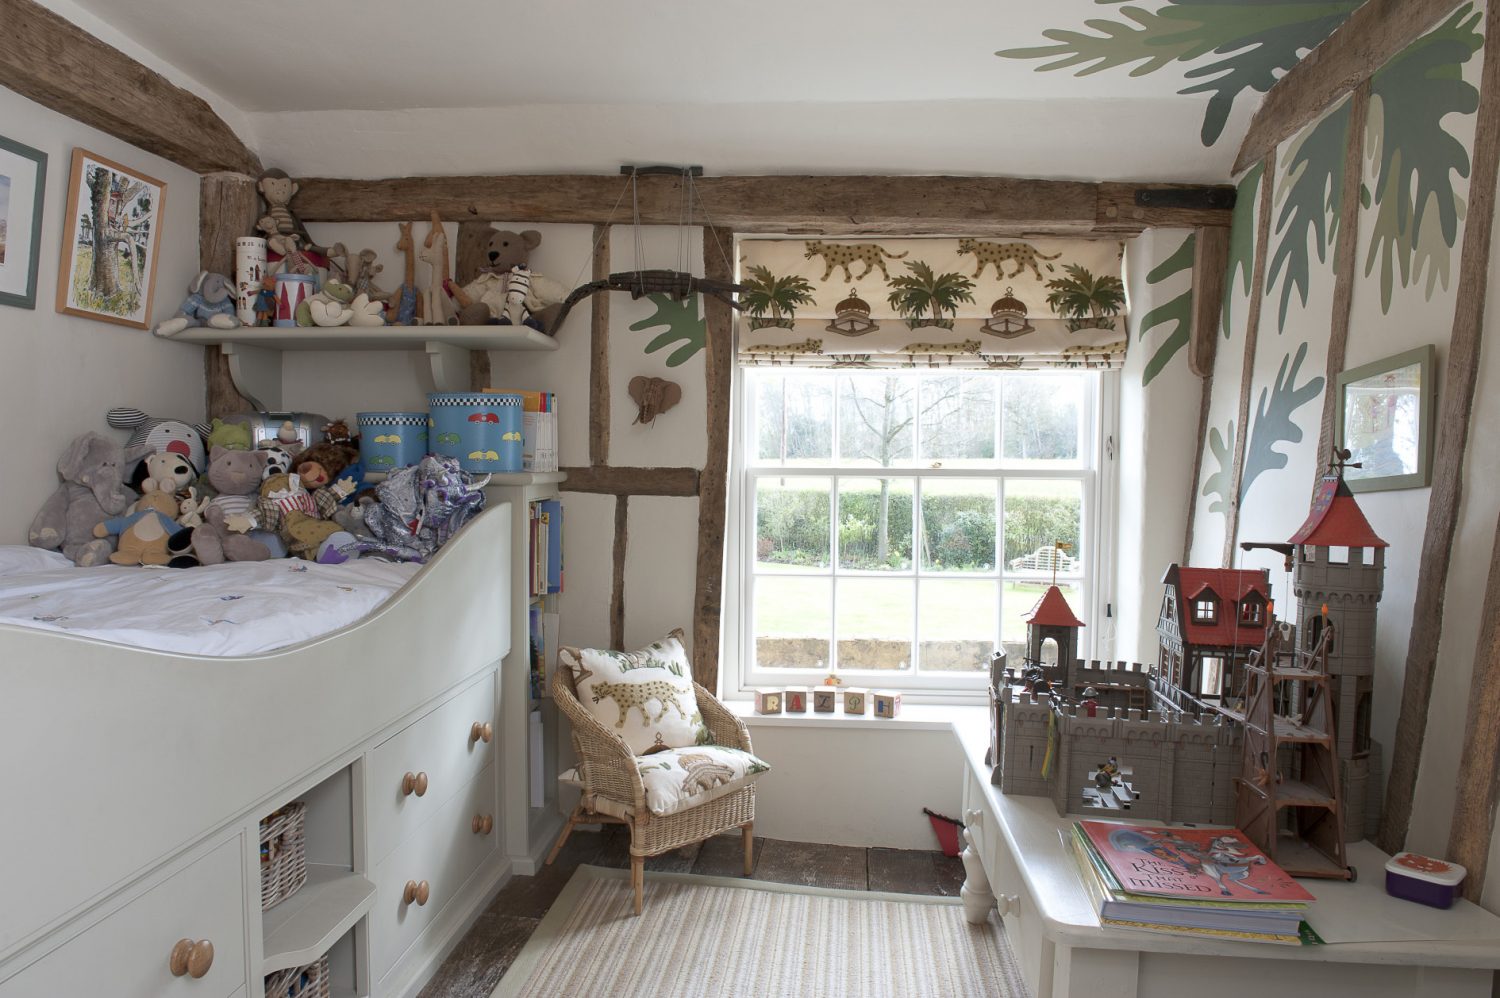 Ralph’s room is home to a cabin bed made for him by the team at Bespoke.